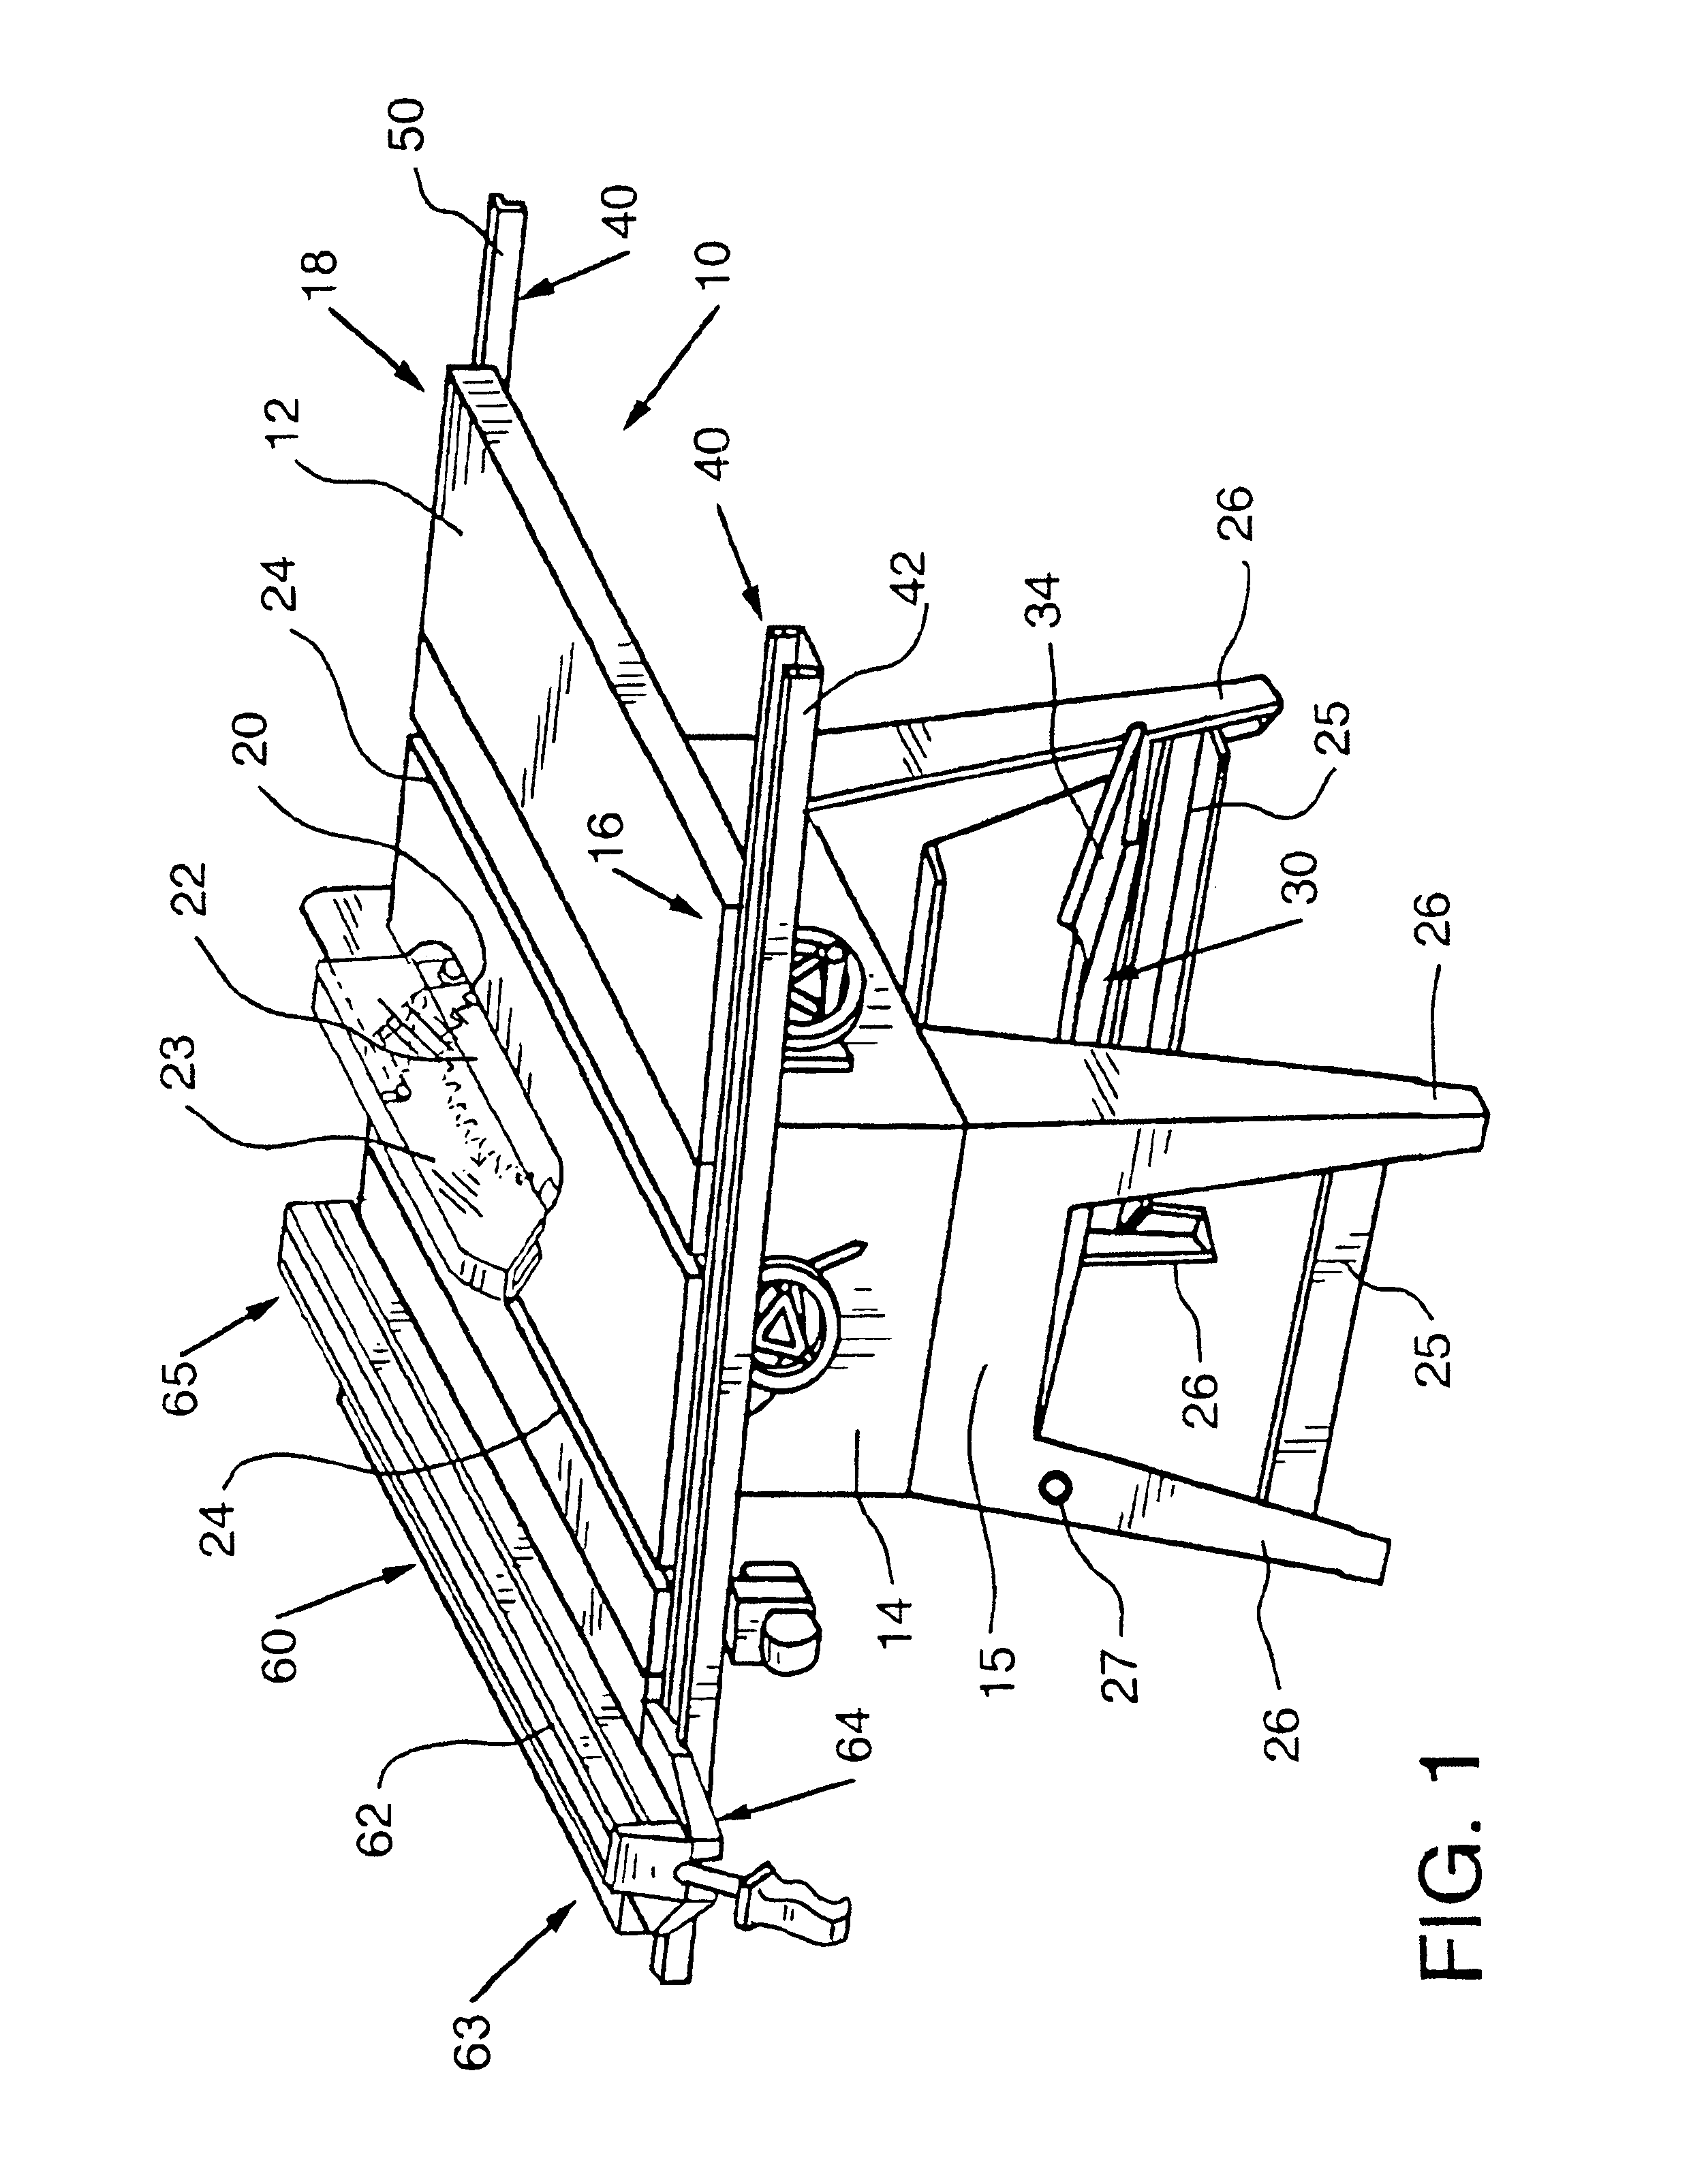 Sawing apparatus and saw fence system